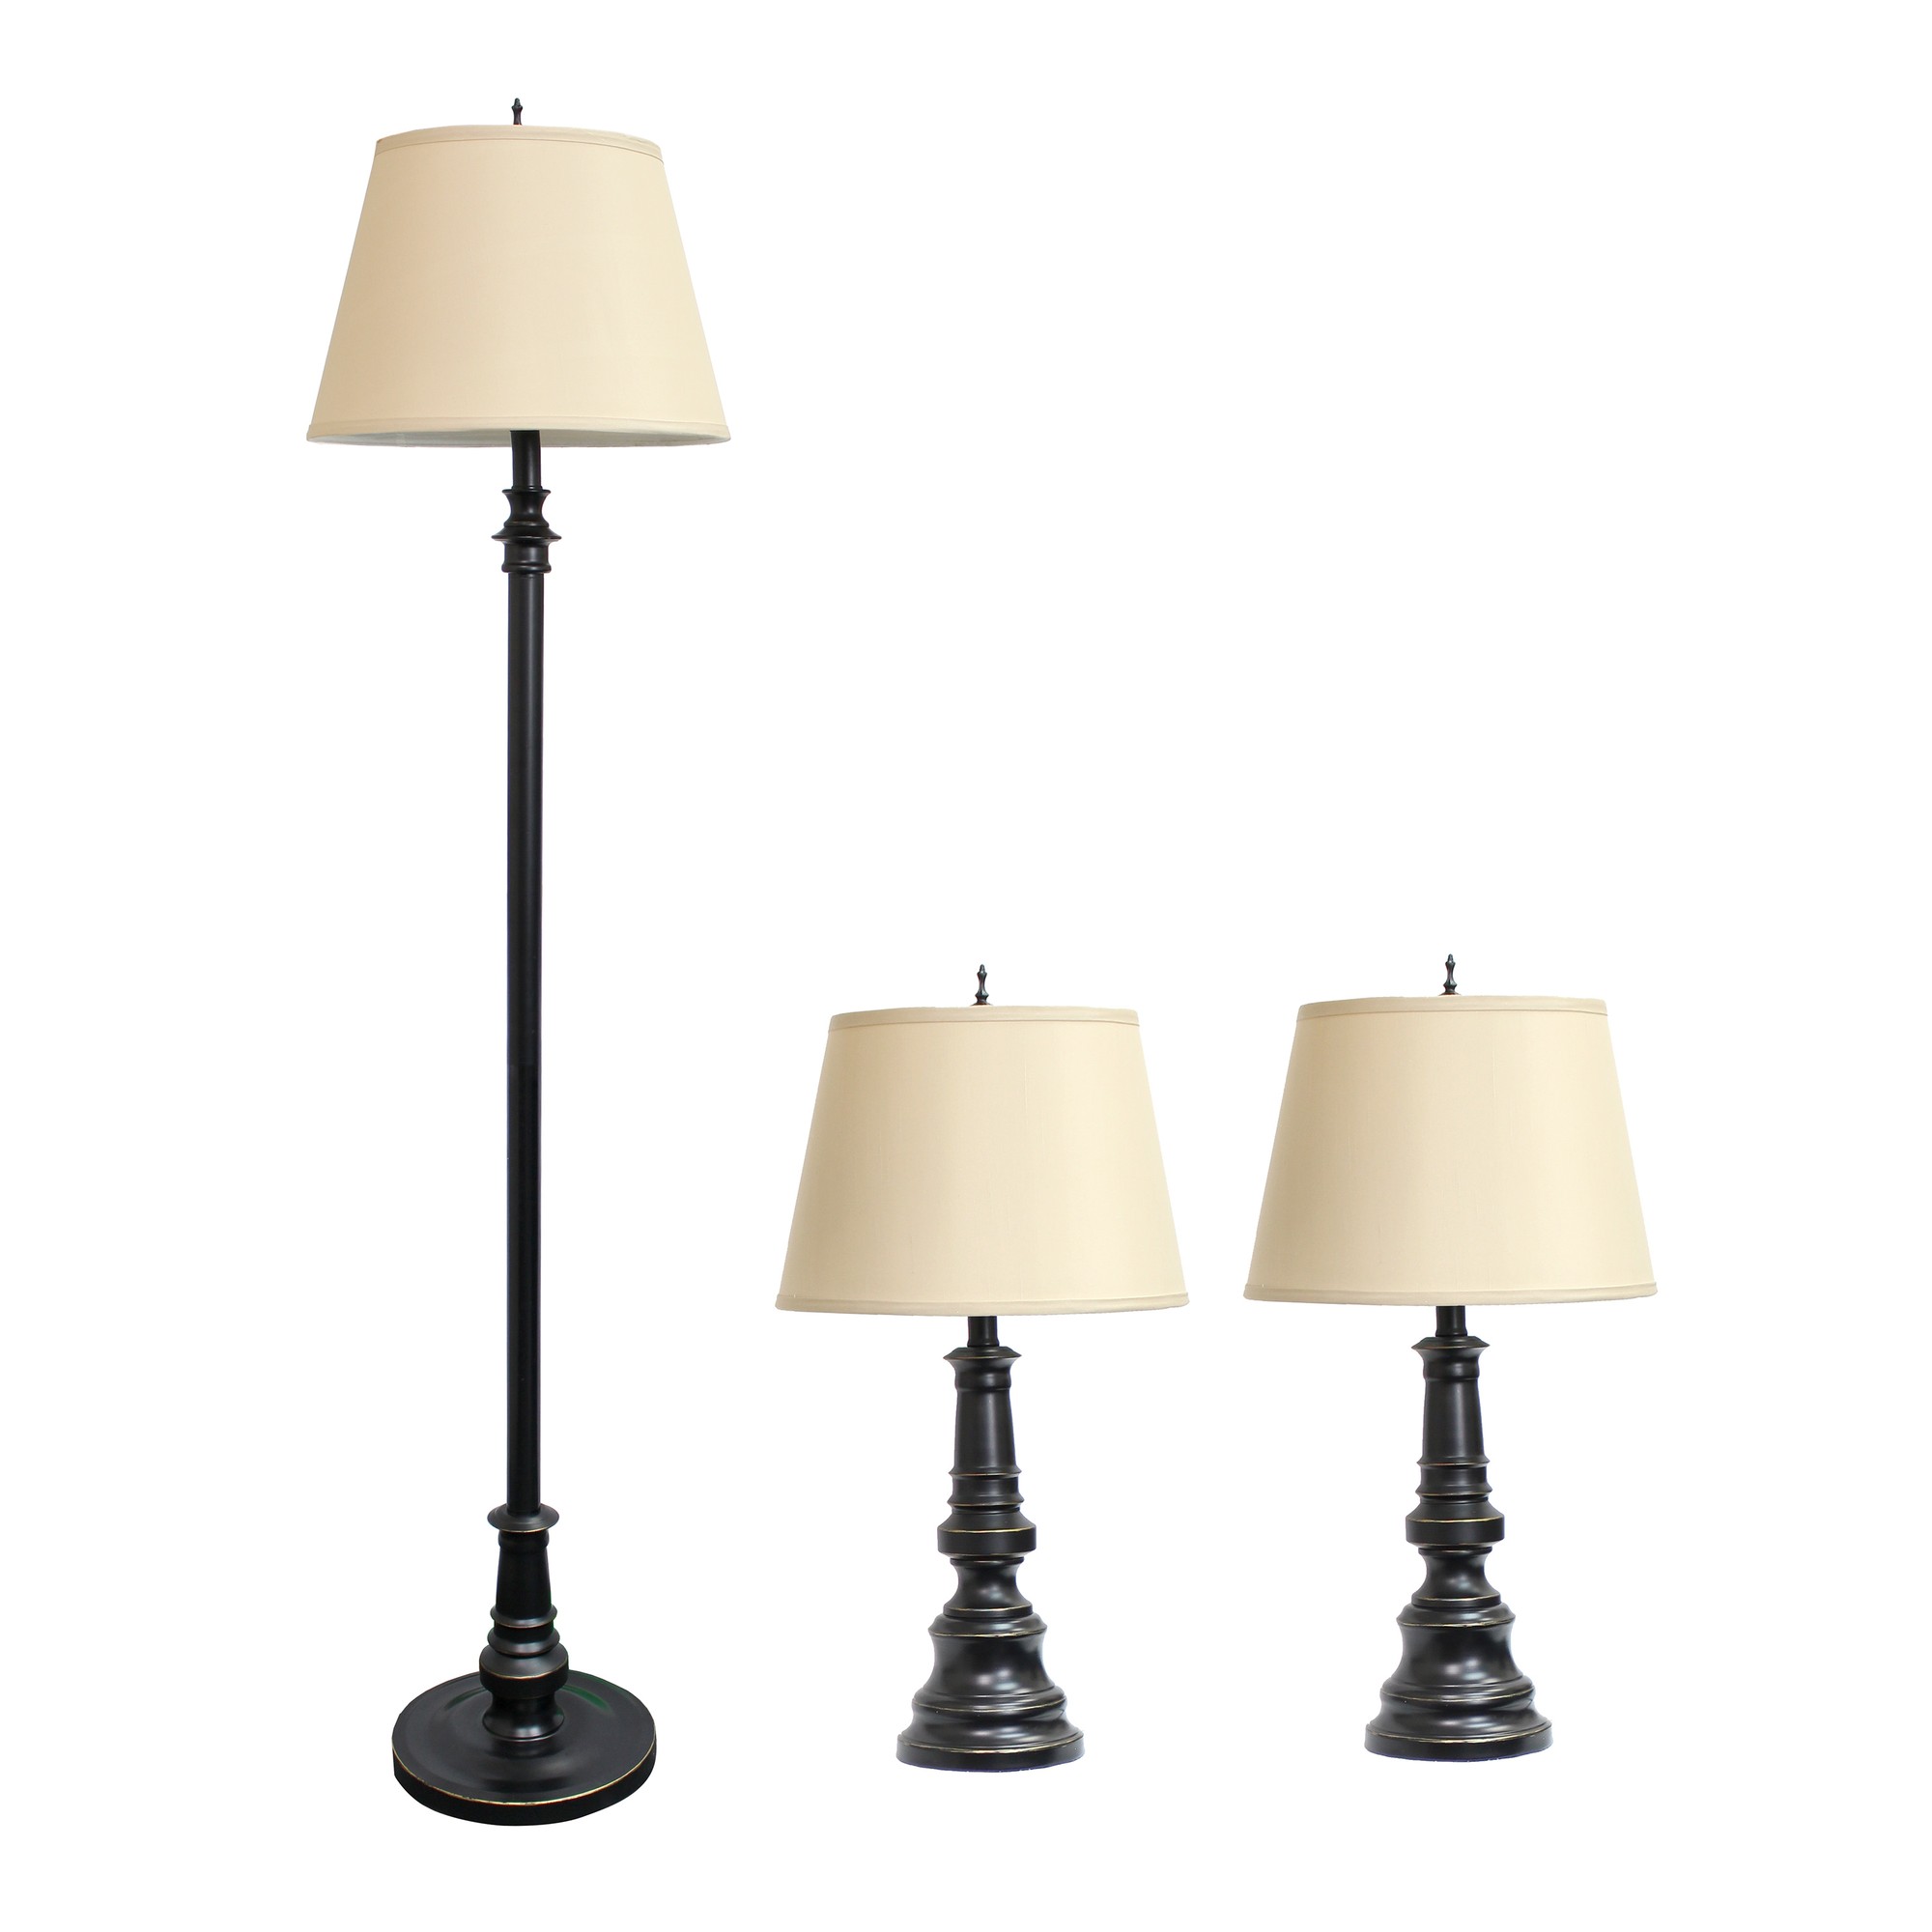 Lalia Home 3 Piece Metal Lamp Set (2 Table Lamps, 1 Floor Lamp) Tan Tapered Drum Fabric Shades and Restoration Bronze Finish